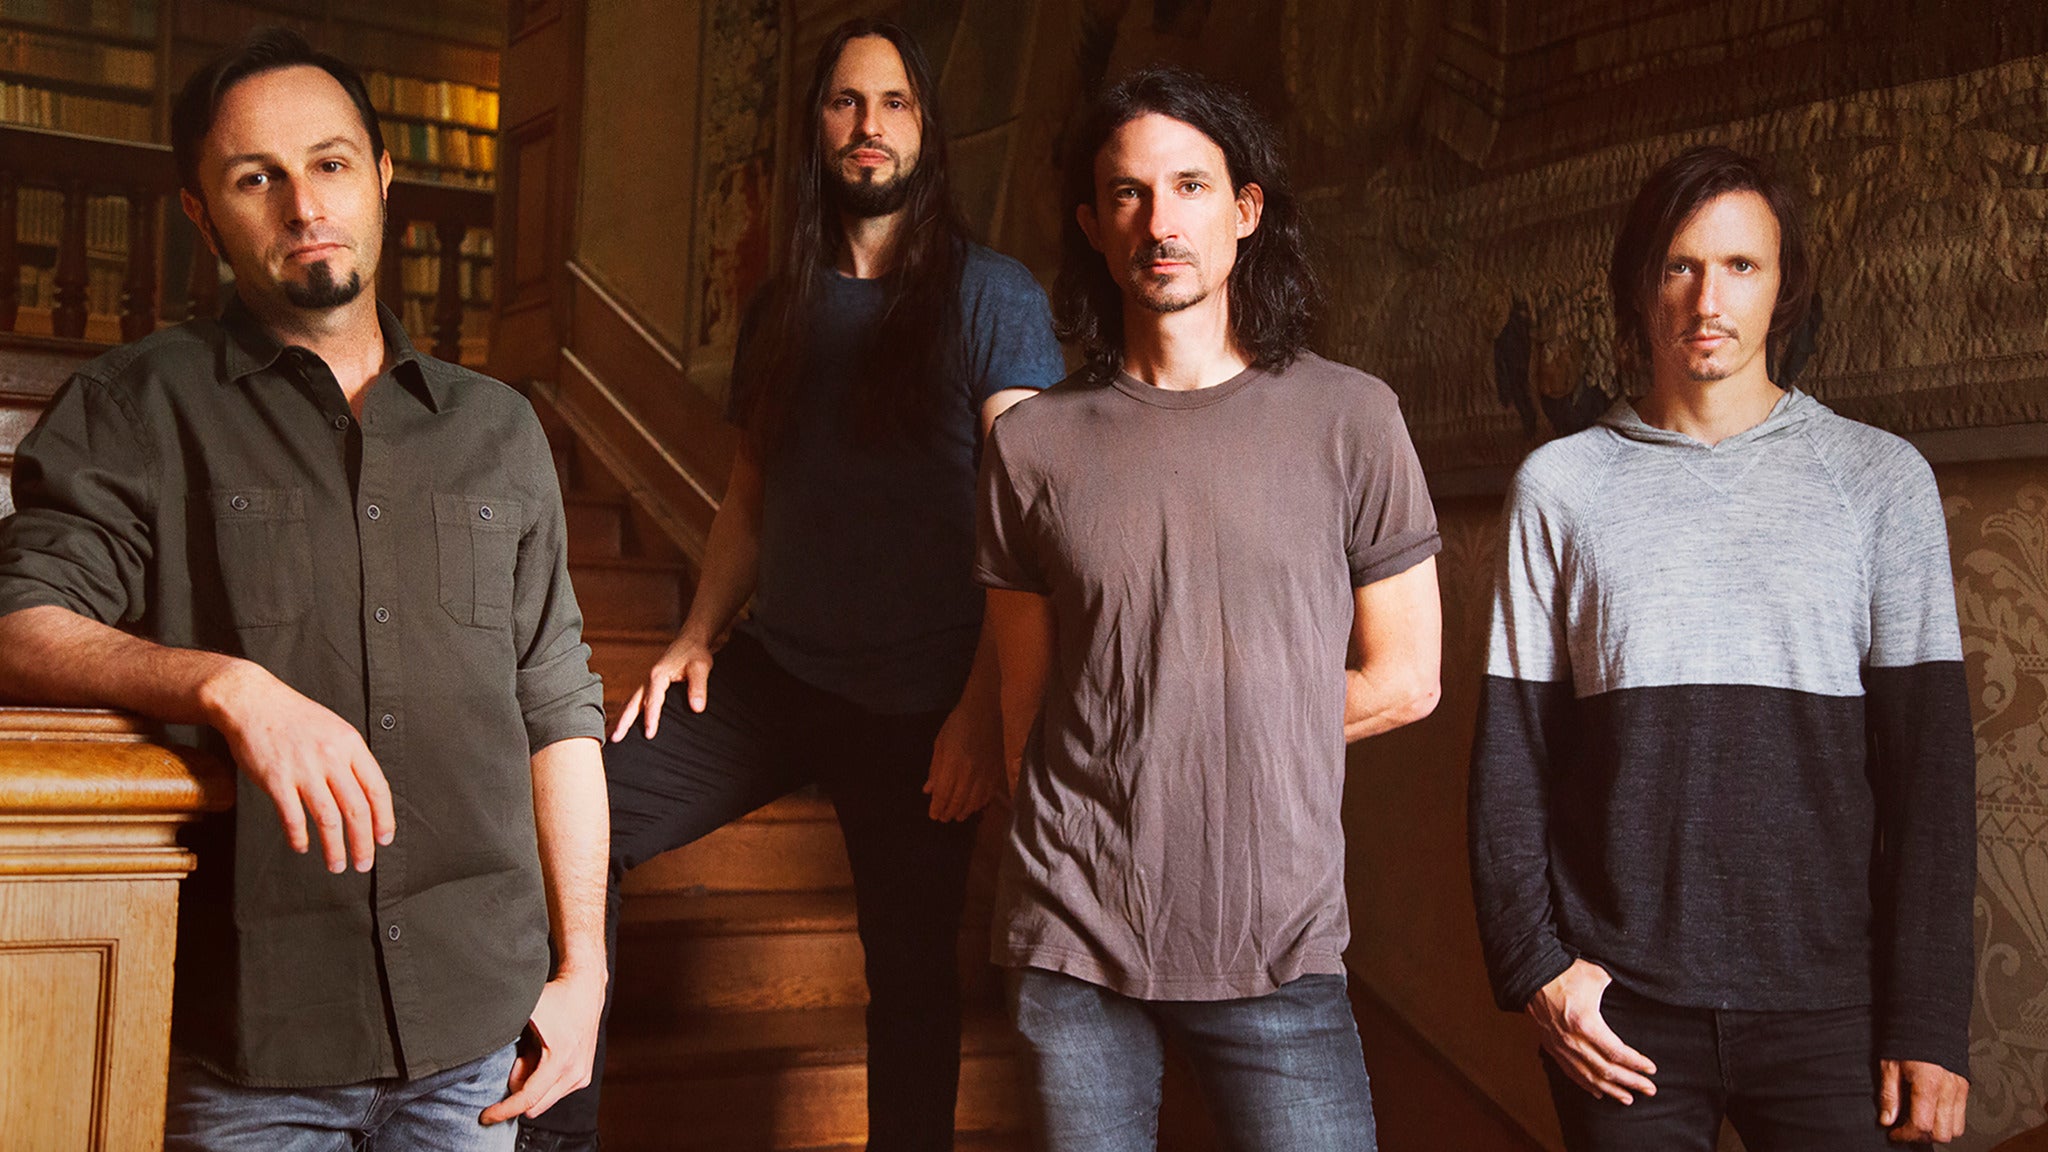 Gojira with special guests Knocked Loose & Alien Weaponry presale code for early tickets in Orlando